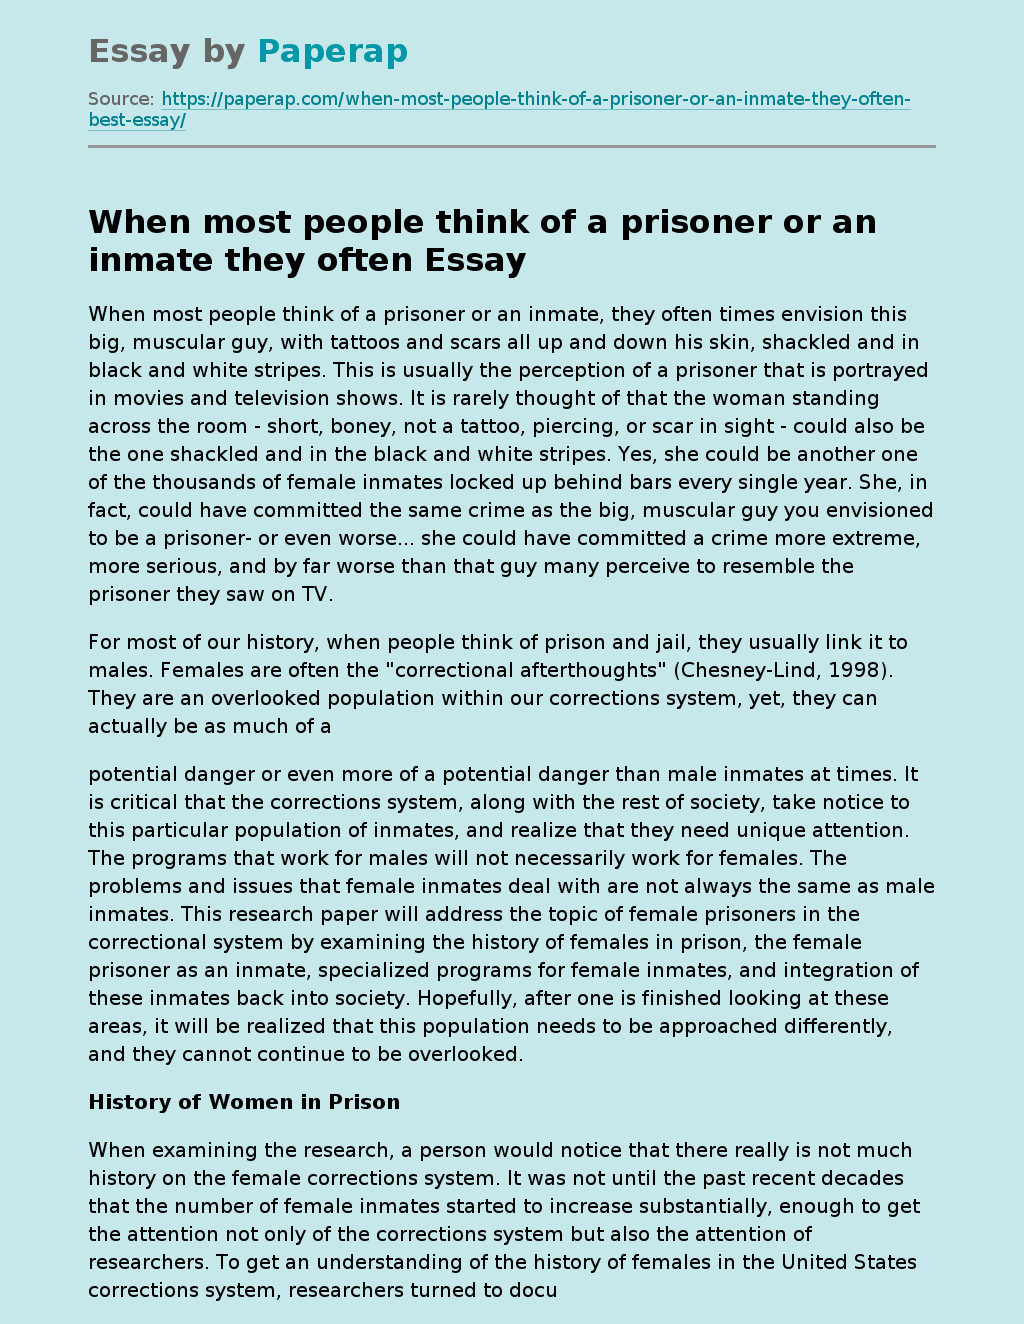 When most people think of a prisoner or an inmate they often